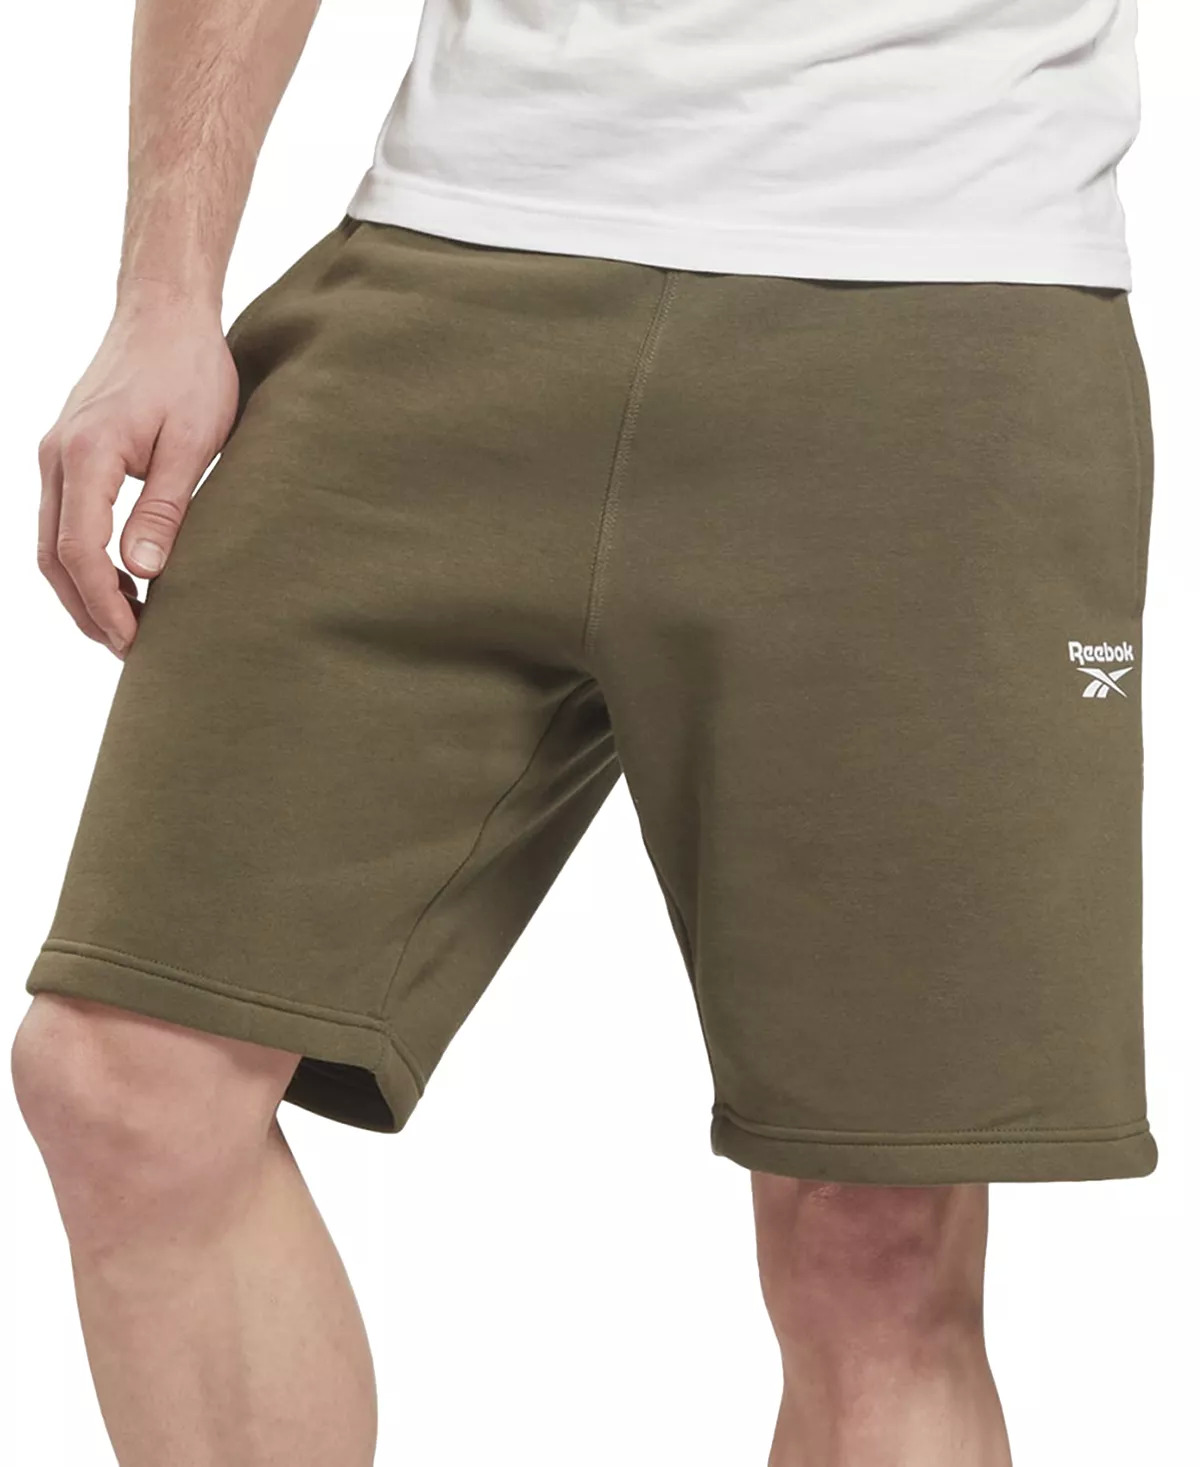 ** Today Only** Activewear Sale: Reebok Men's Regular-Fit Sweat Shorts $14, Puma Women's Bike Shorts $10 & More + Free Store Pickup at Macy's or F/S on $25+